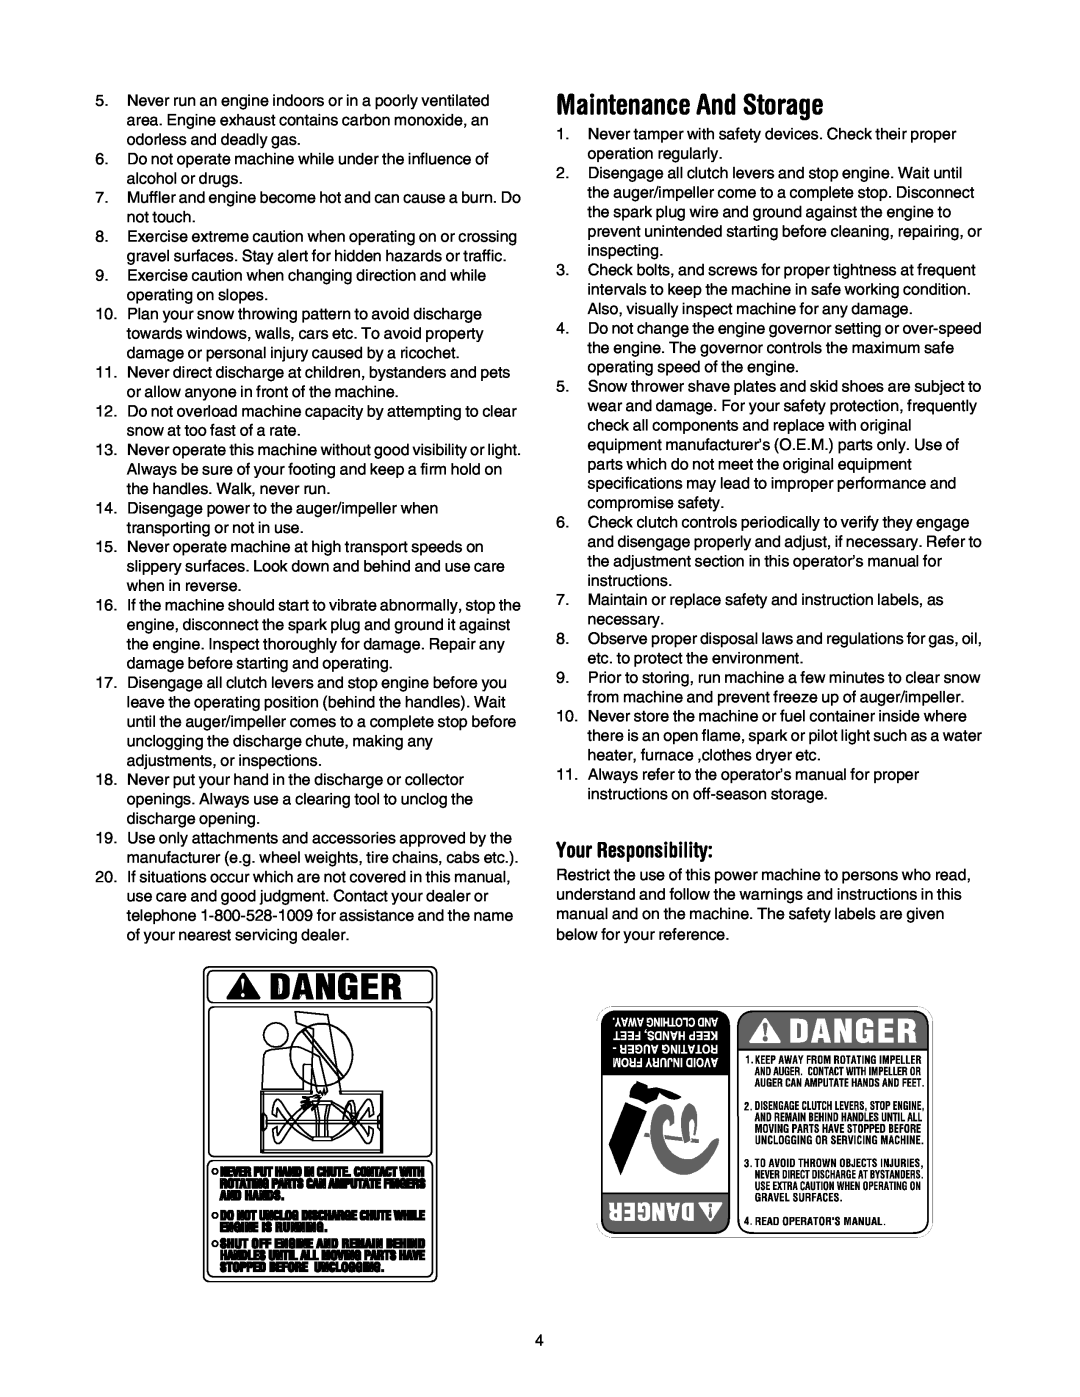 Cub Cadet 1345 SWE manual Maintenance And Storage, Your Responsibility 